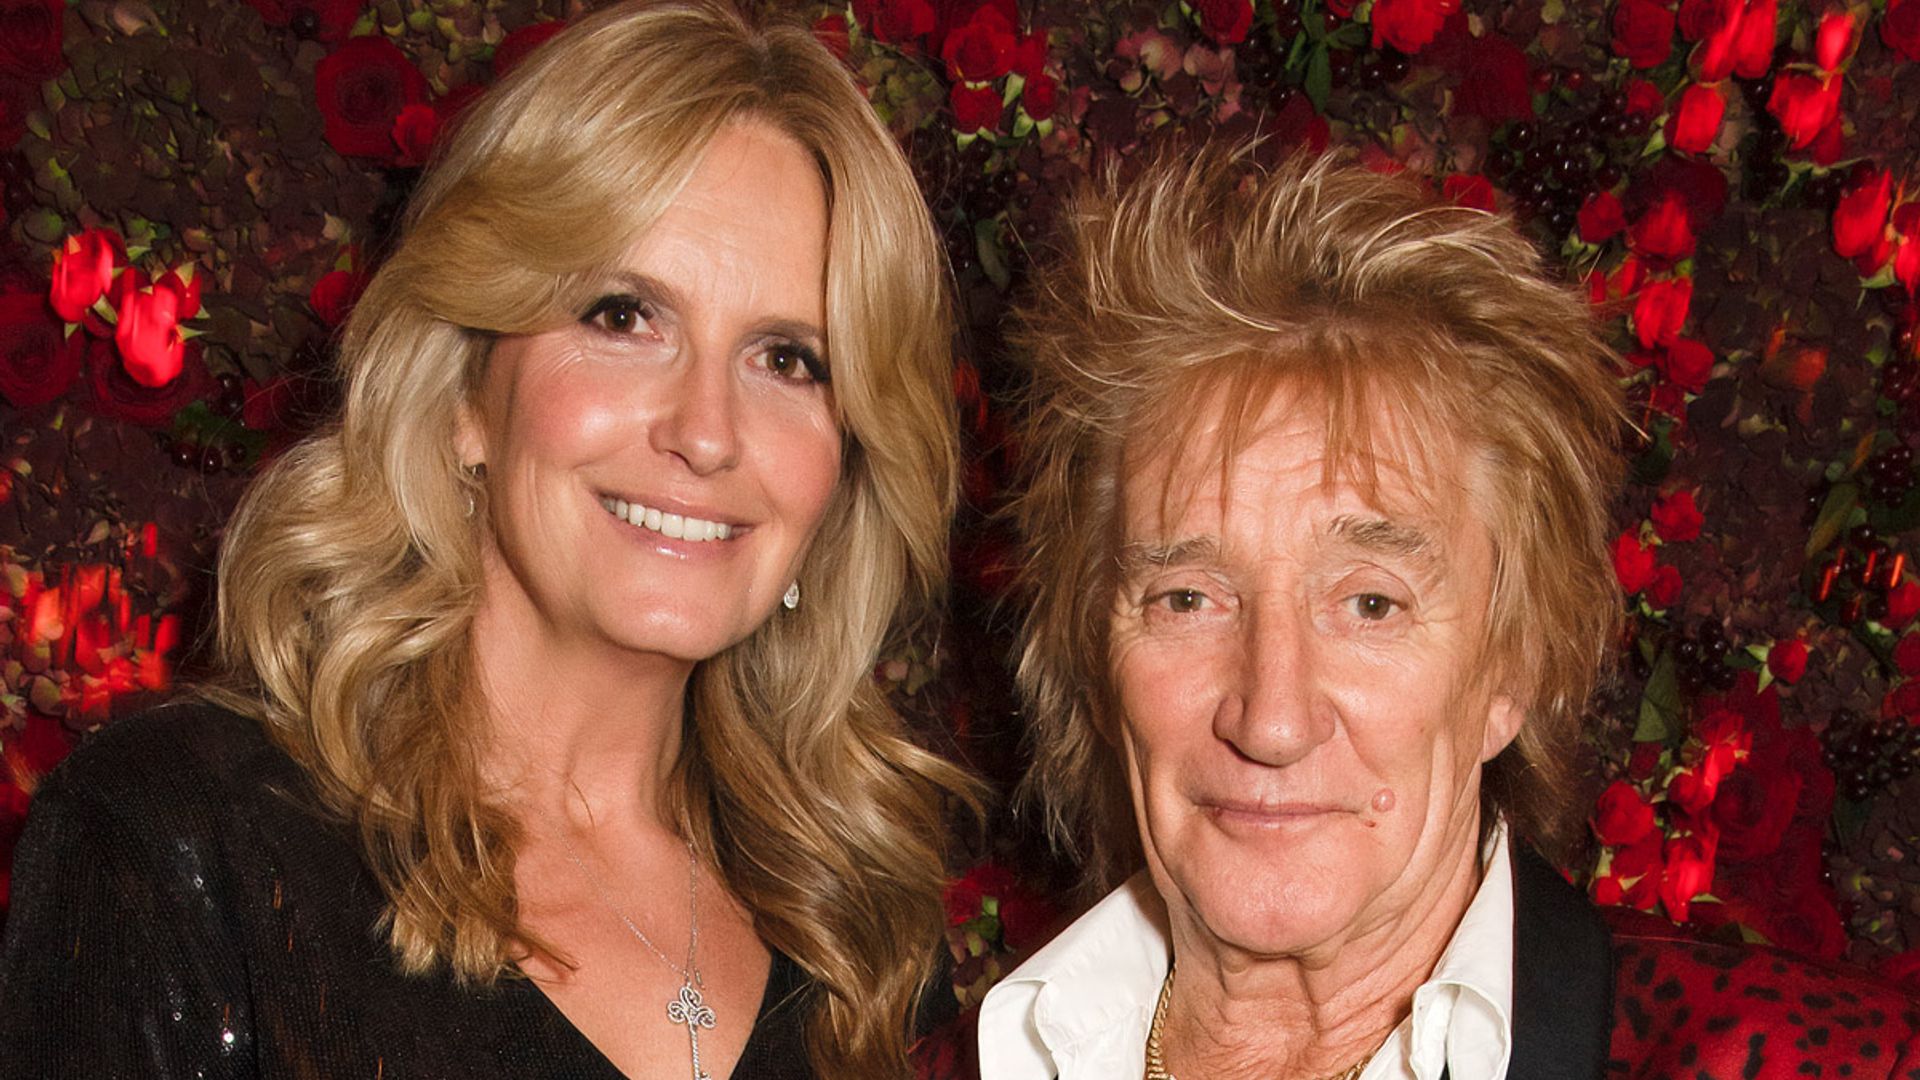 Shining Generator fort Penny Lancaster shares rare photo of Rod Stewart's lookalike son Aiden, 12  - and it's uncanny | HELLO!